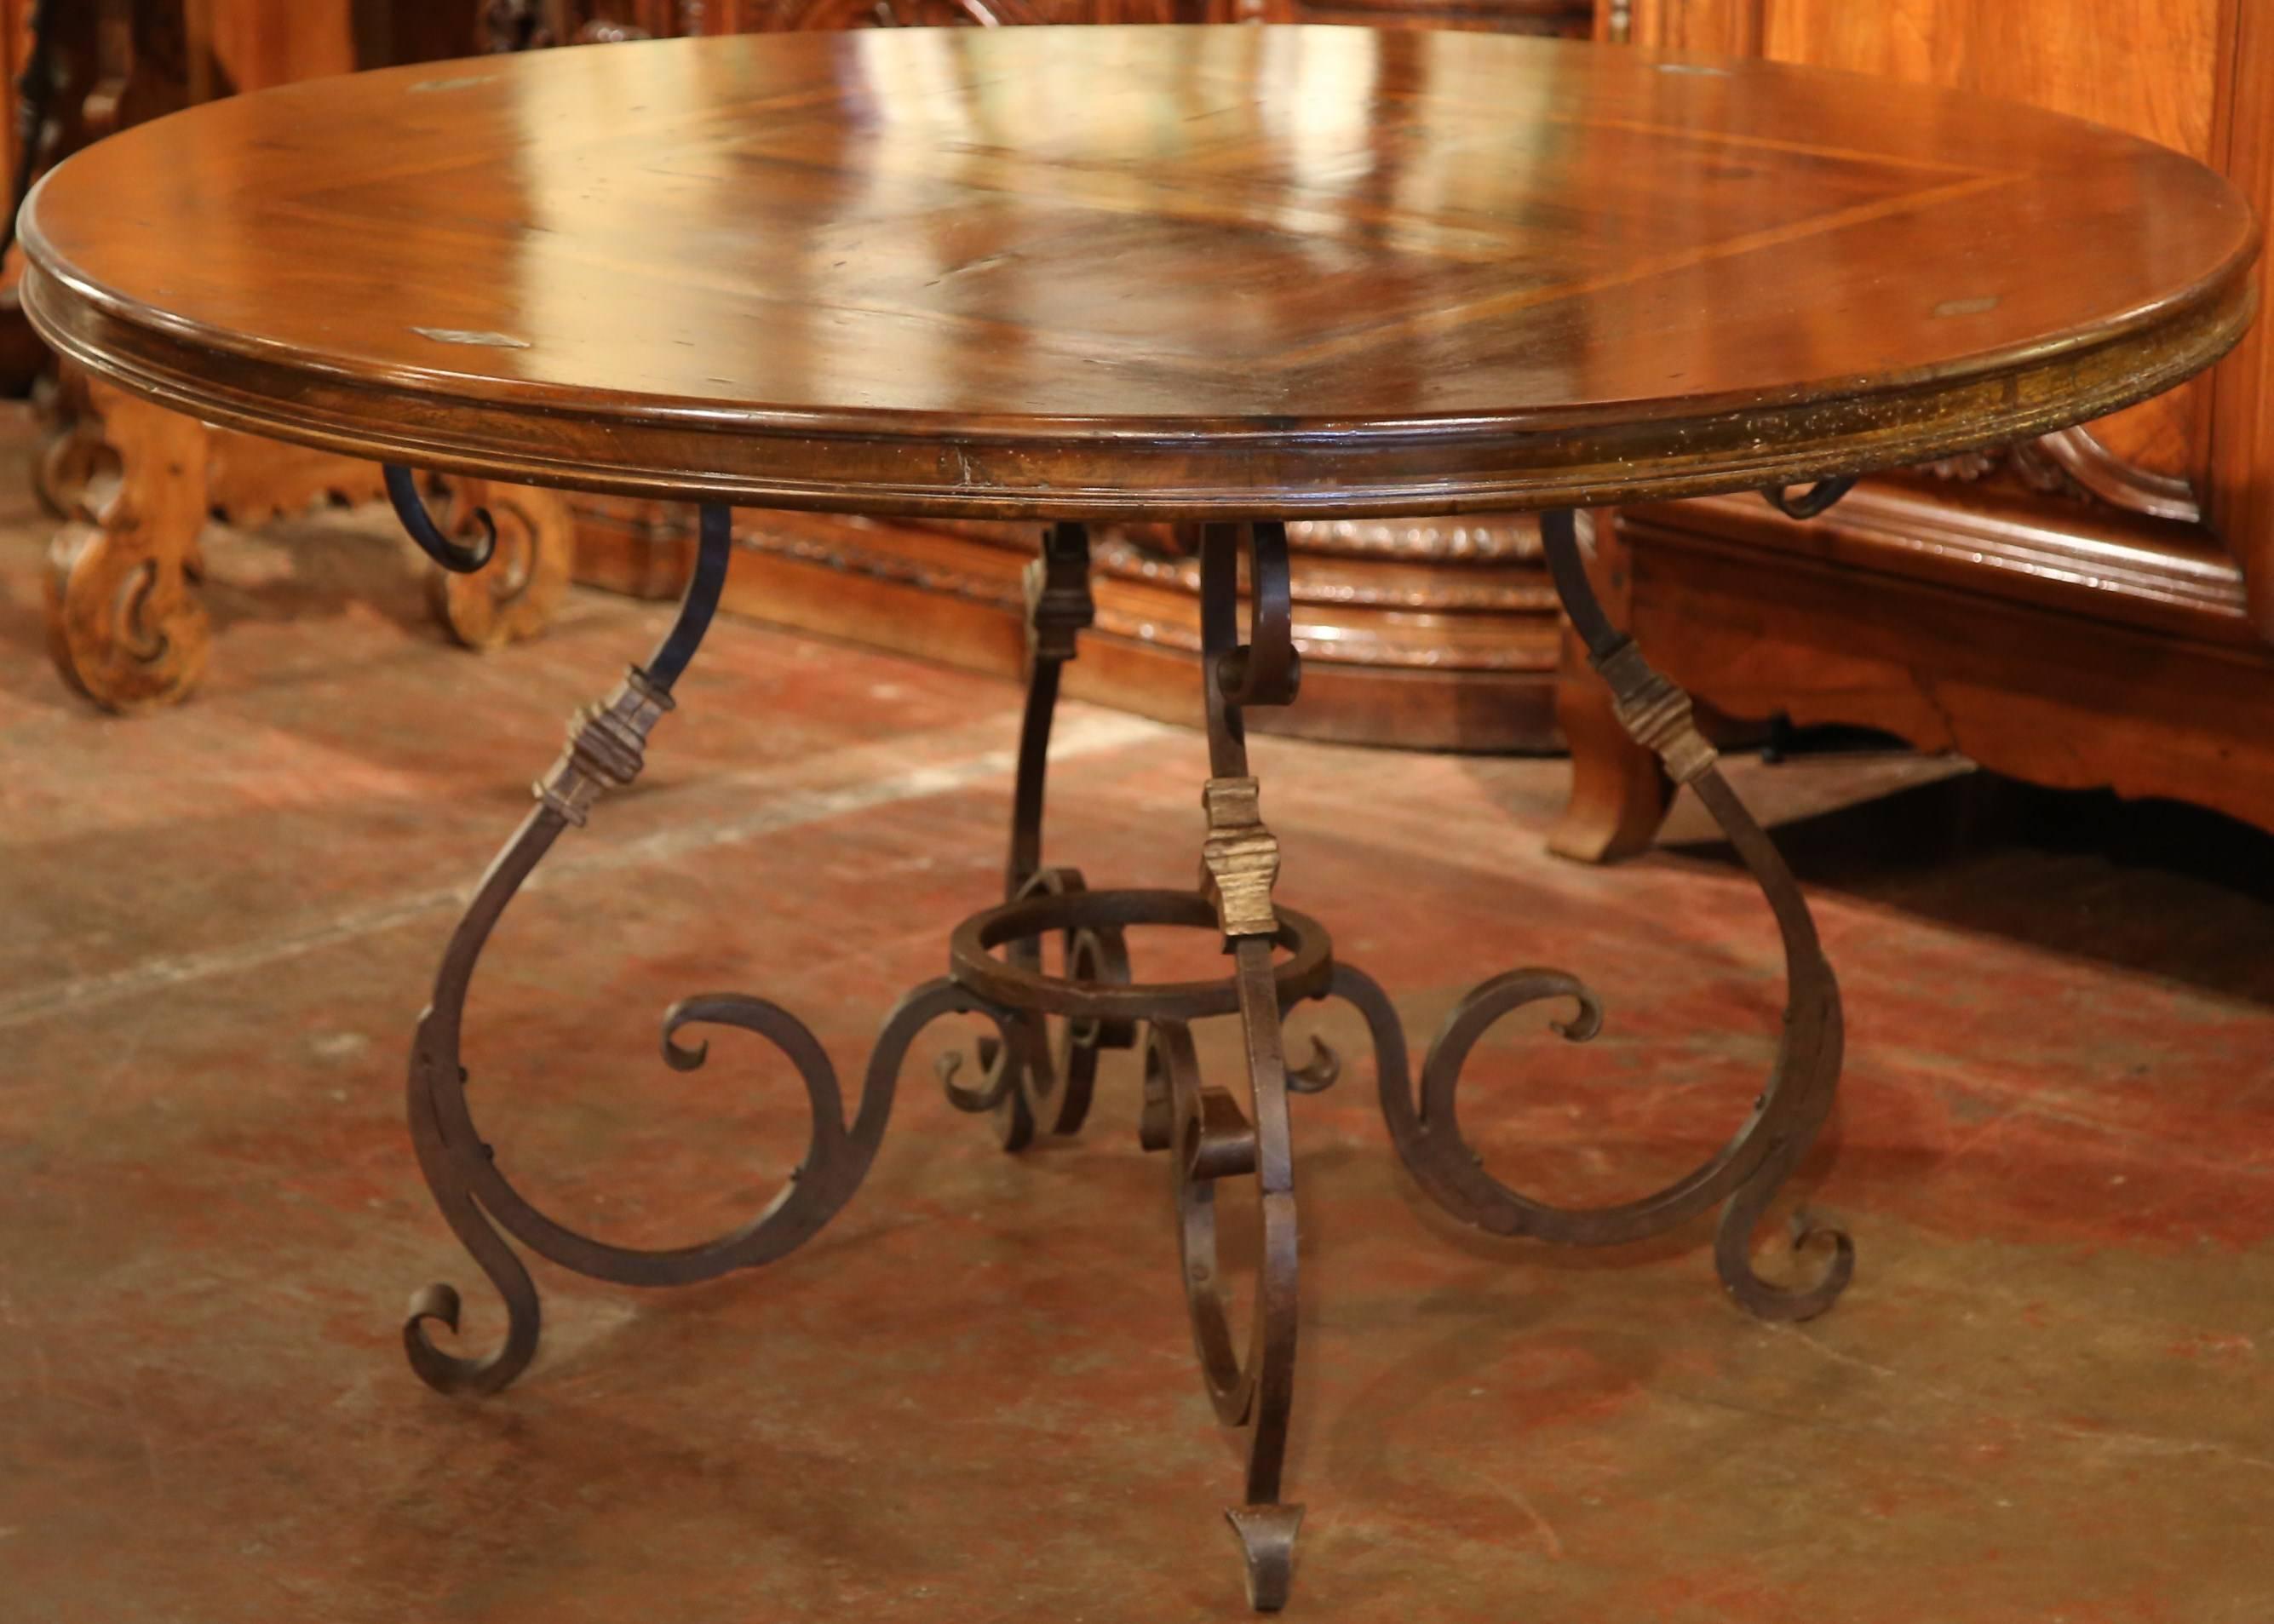 Contemporary French Round Table with Heavy Wrought Iron Base and Walnut Parquet Top